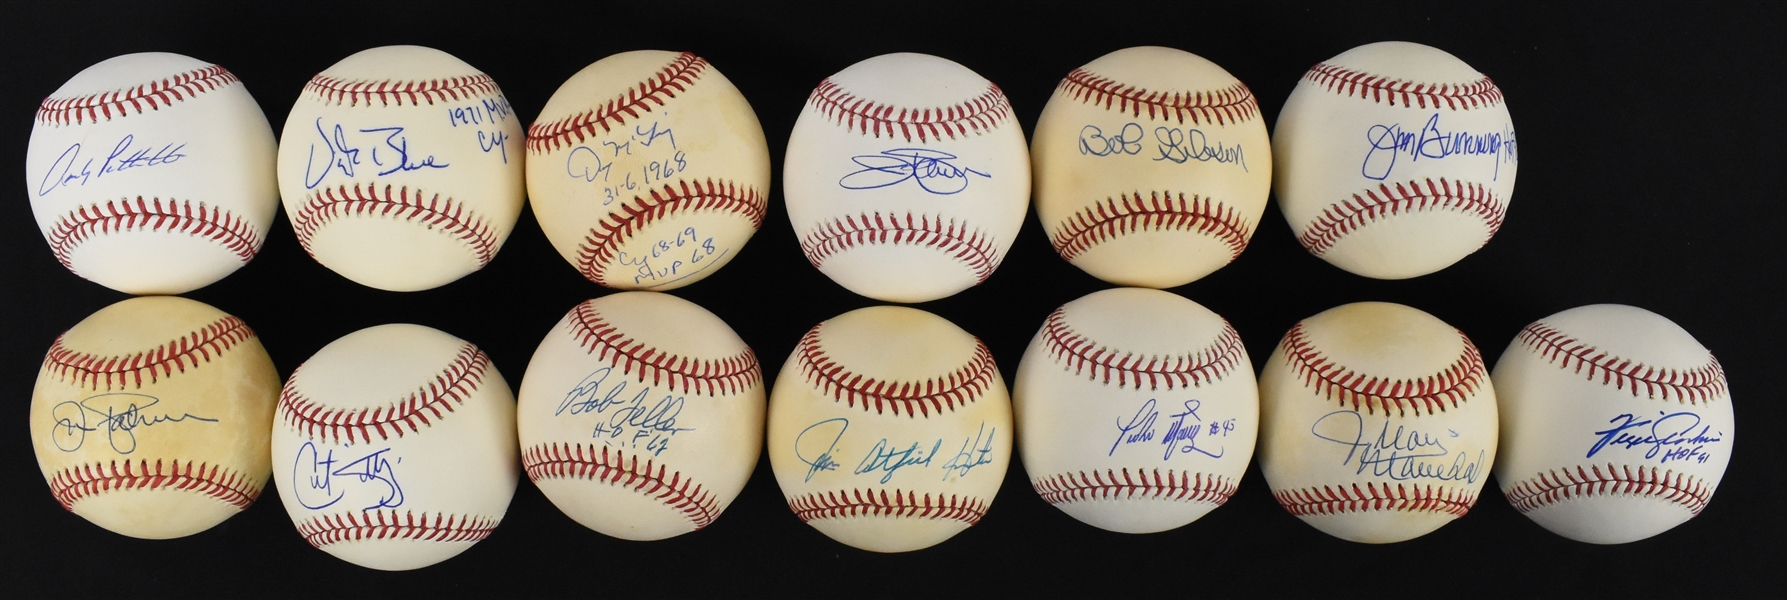 Collection 13 of Autographed Pitchers Baseballs 